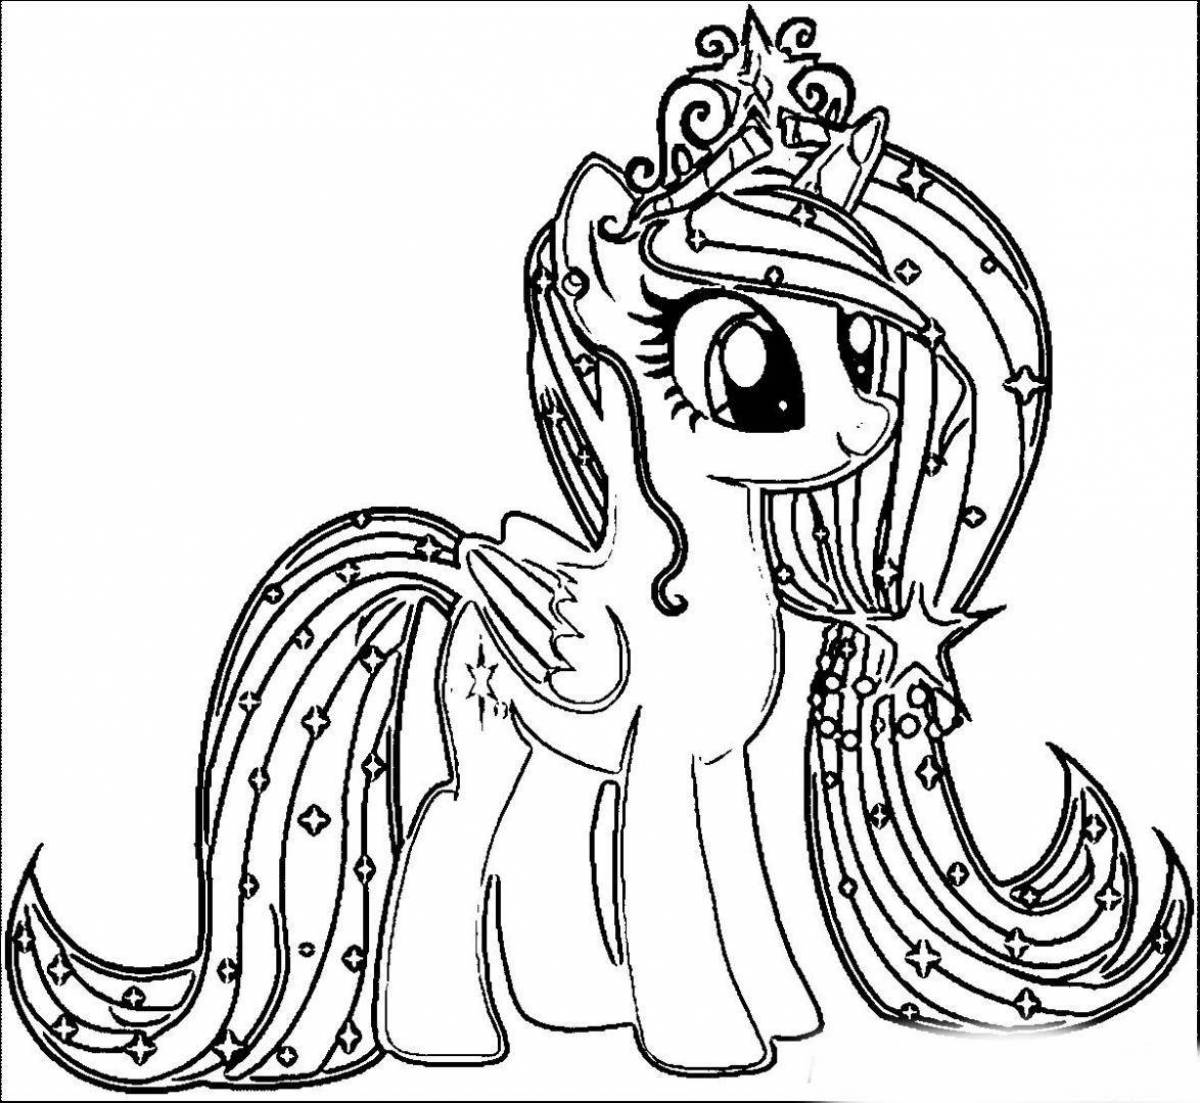 Coloring page adorable ponyville pony